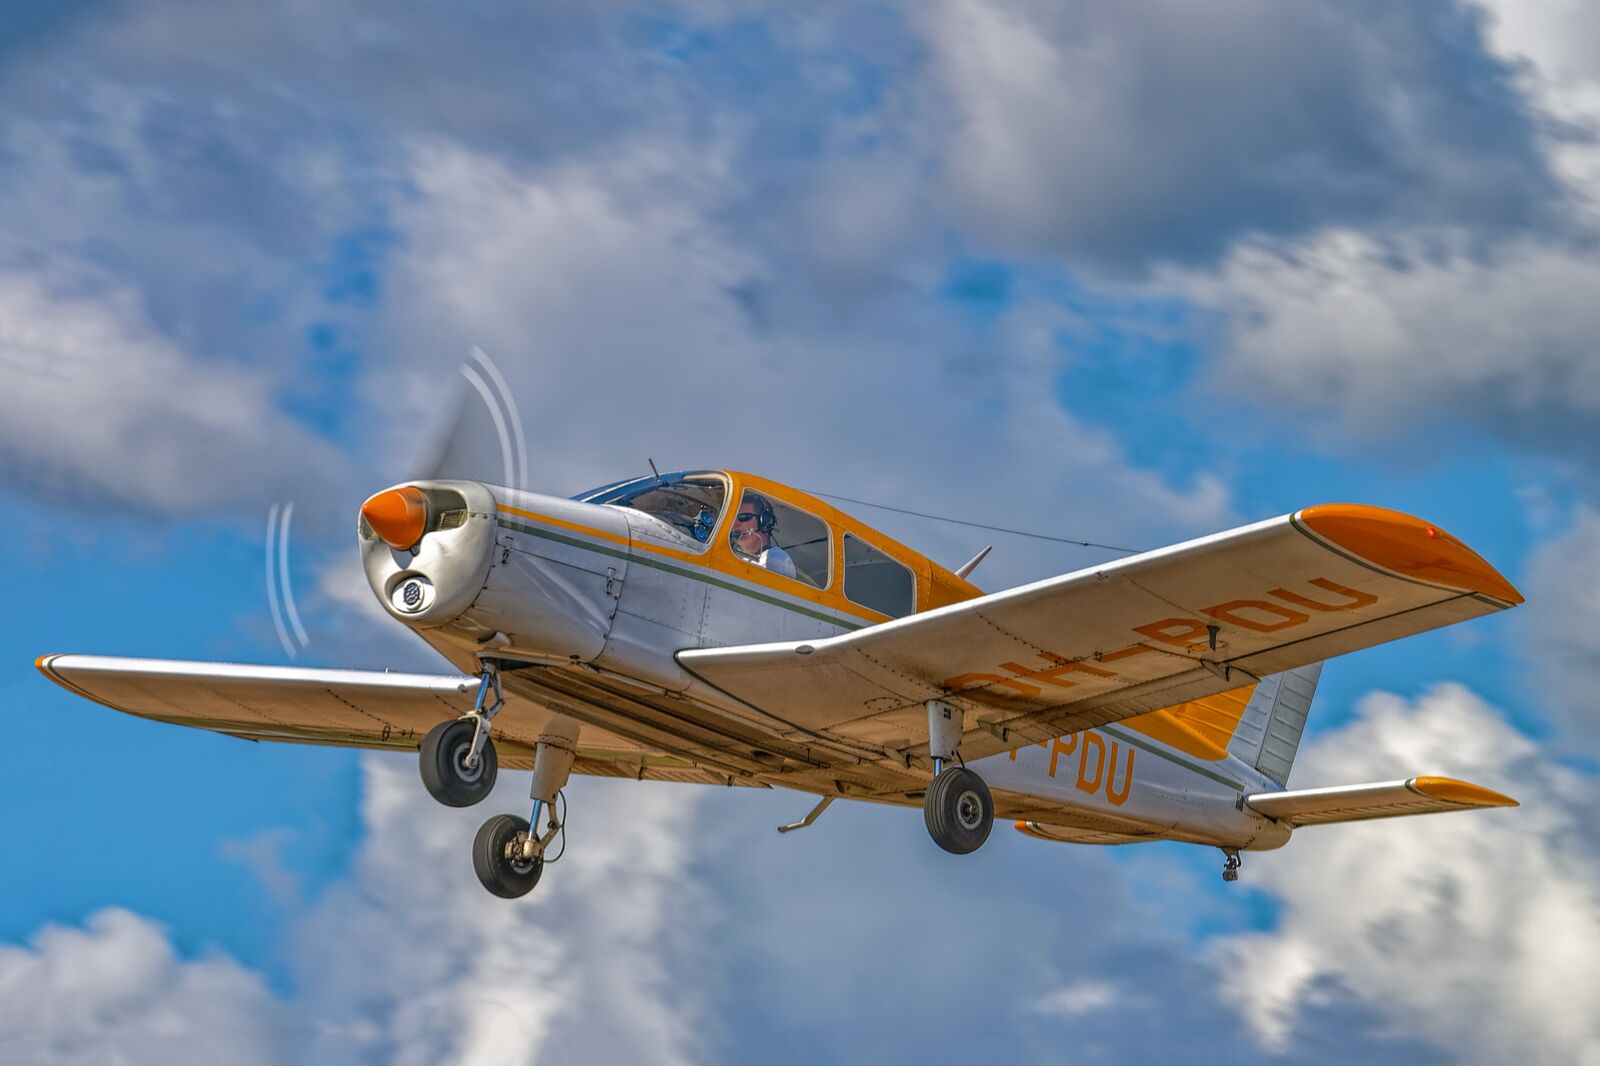 Four-seat light all-metal single-engined piston-powered airplane Piper PA-28-140 Cherokee Cruiser OH-PDU flying in a blue sky against a background of white clouds.